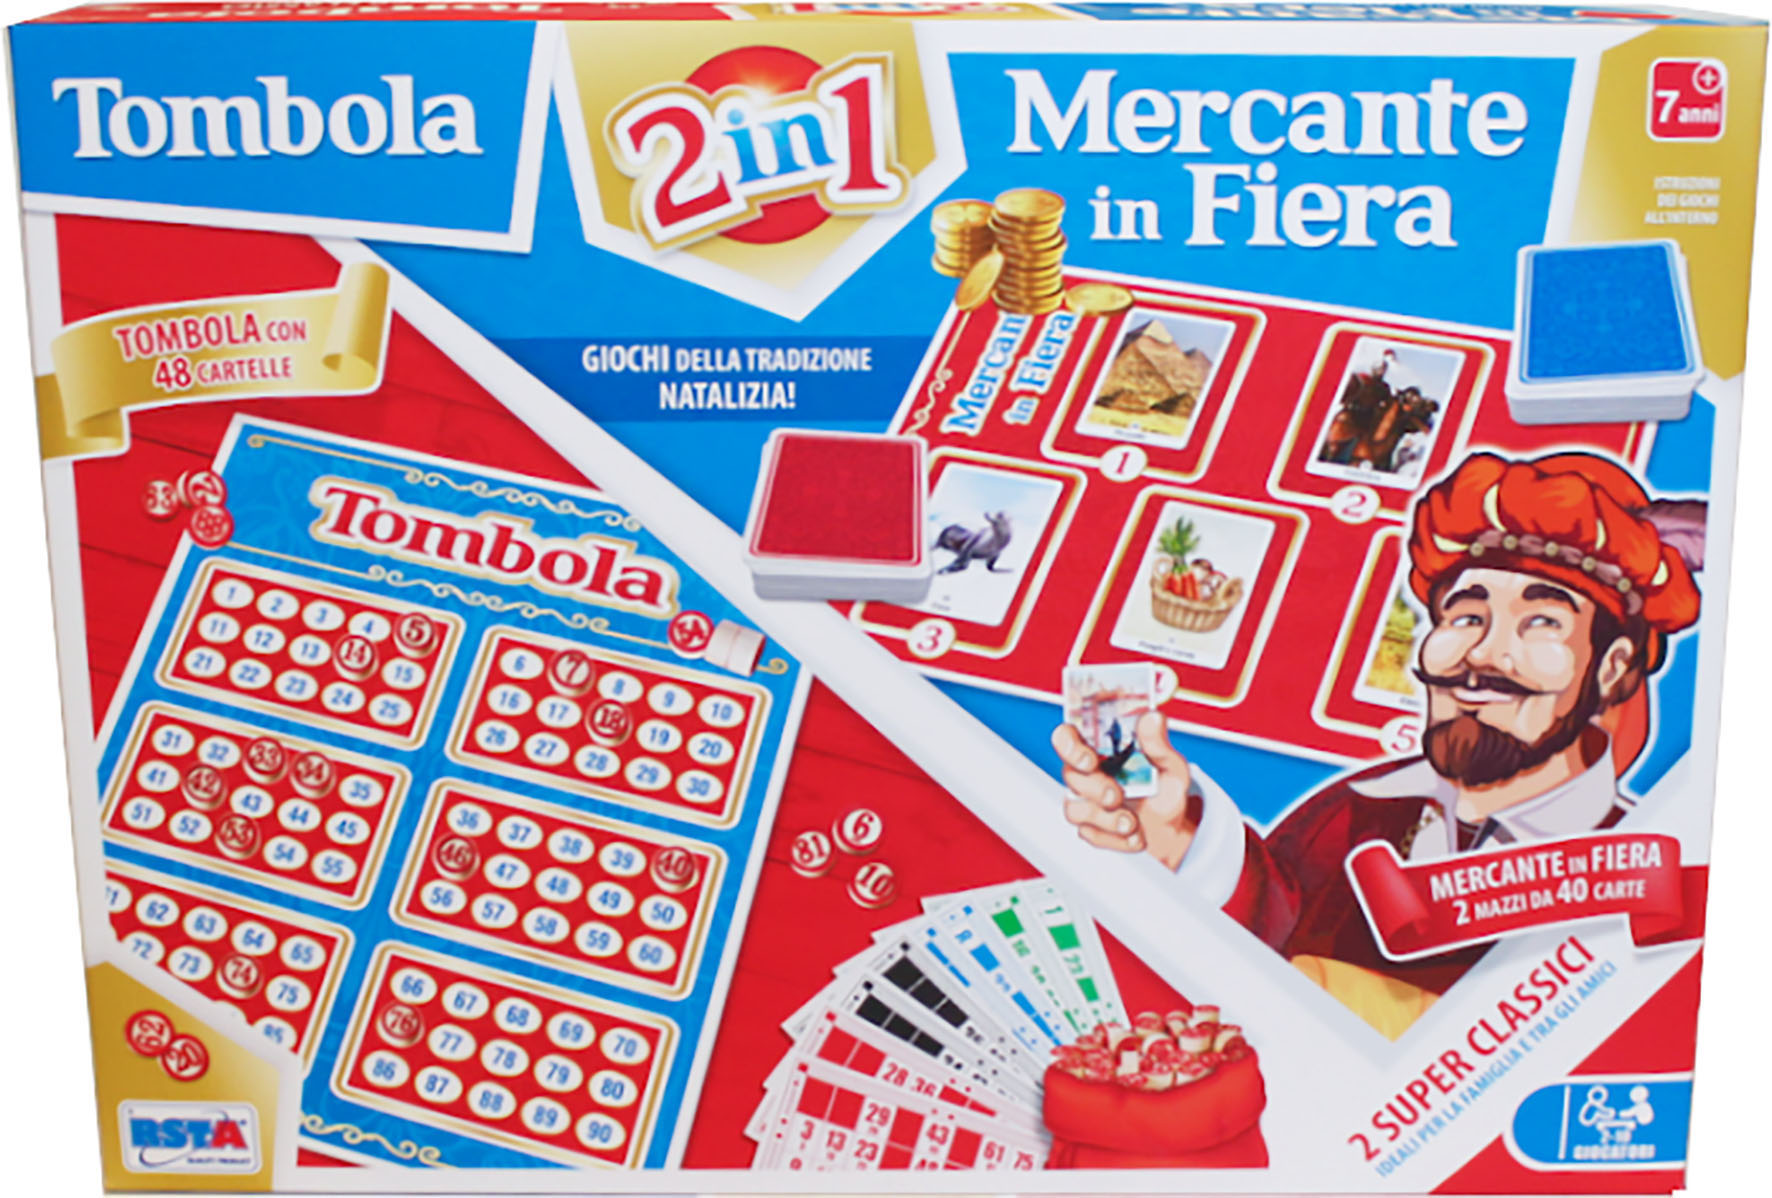 MERCANTE IN FIERA TOMBOLA 48